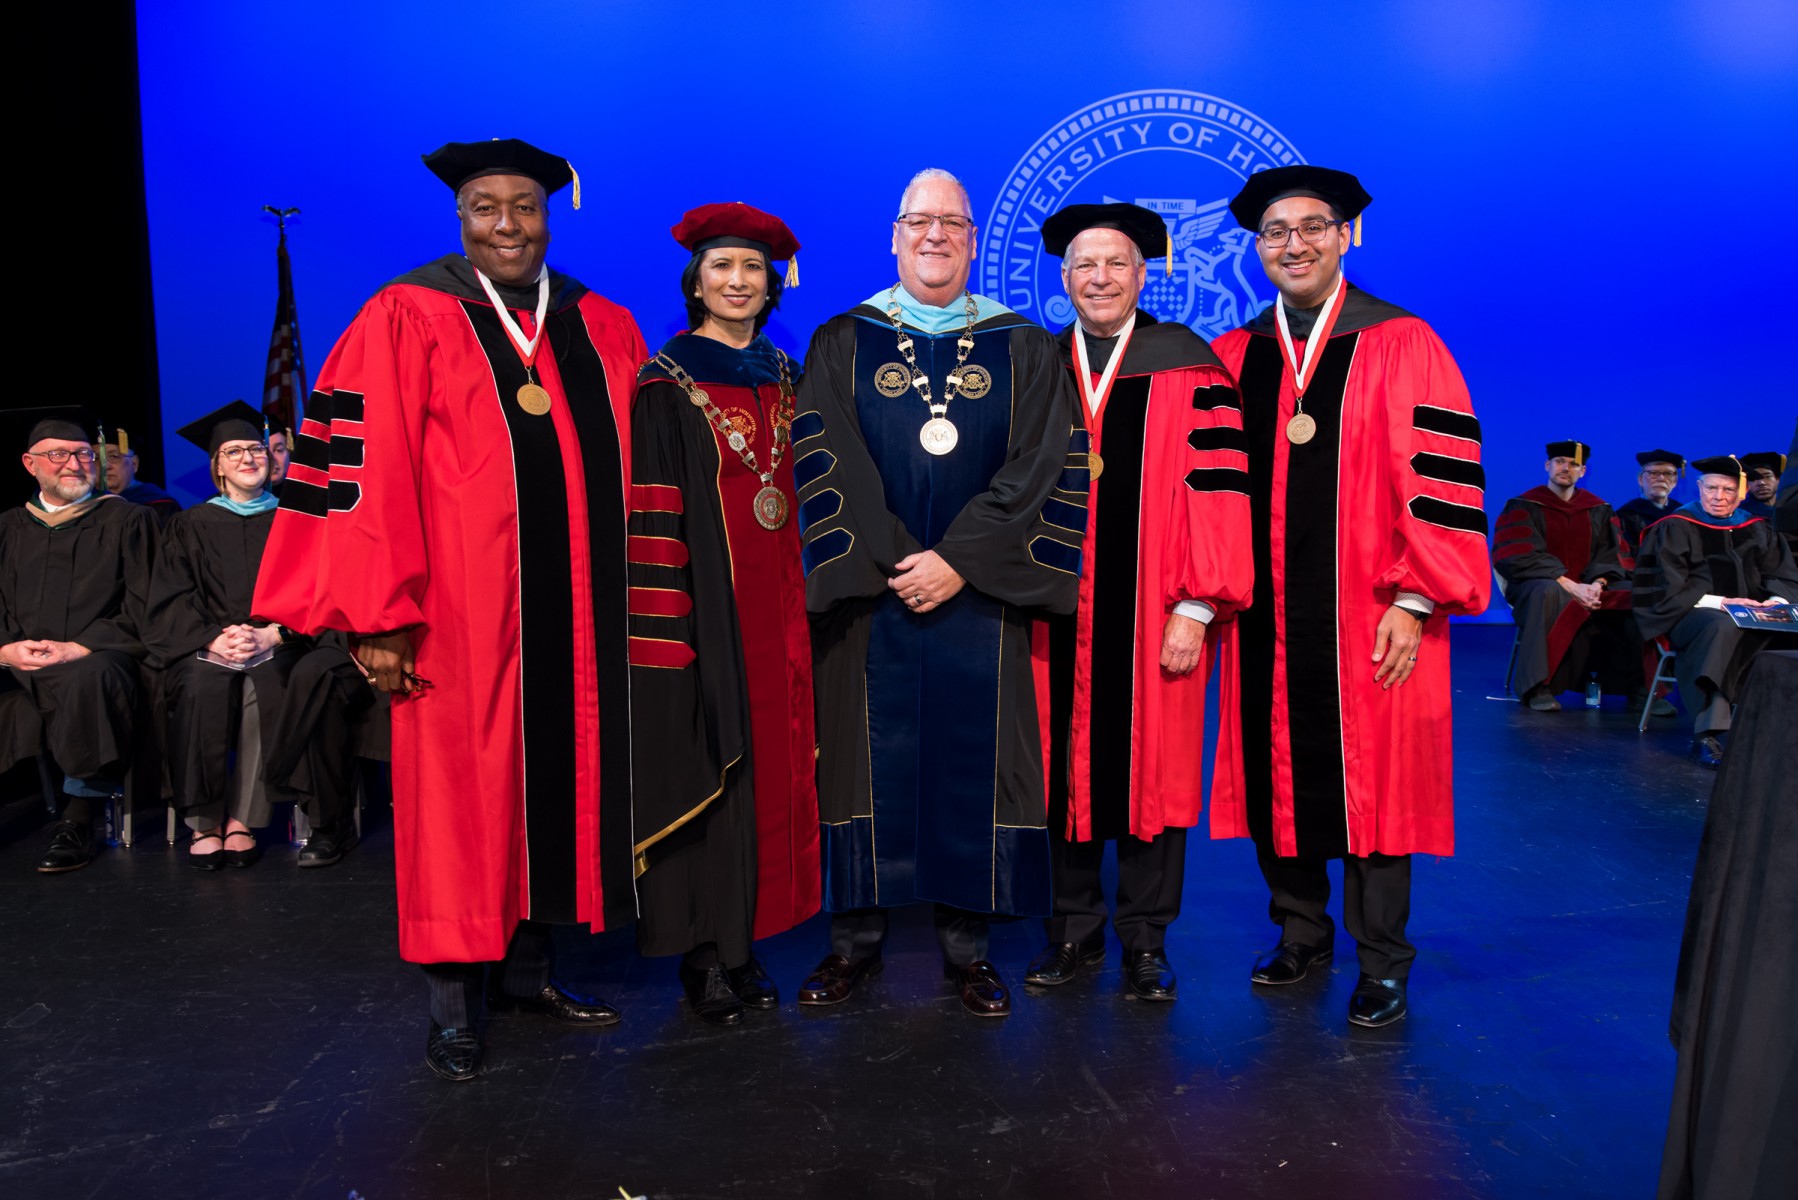 From left: University of Houston System Board of Regents Member Ricky Raven, UH System Chancellor Renu Khator, UHCL President Richard Walker, UH System Board of Regents Vice Chairman Jack Moore, and UH System Student Regent Edward Carrizales.